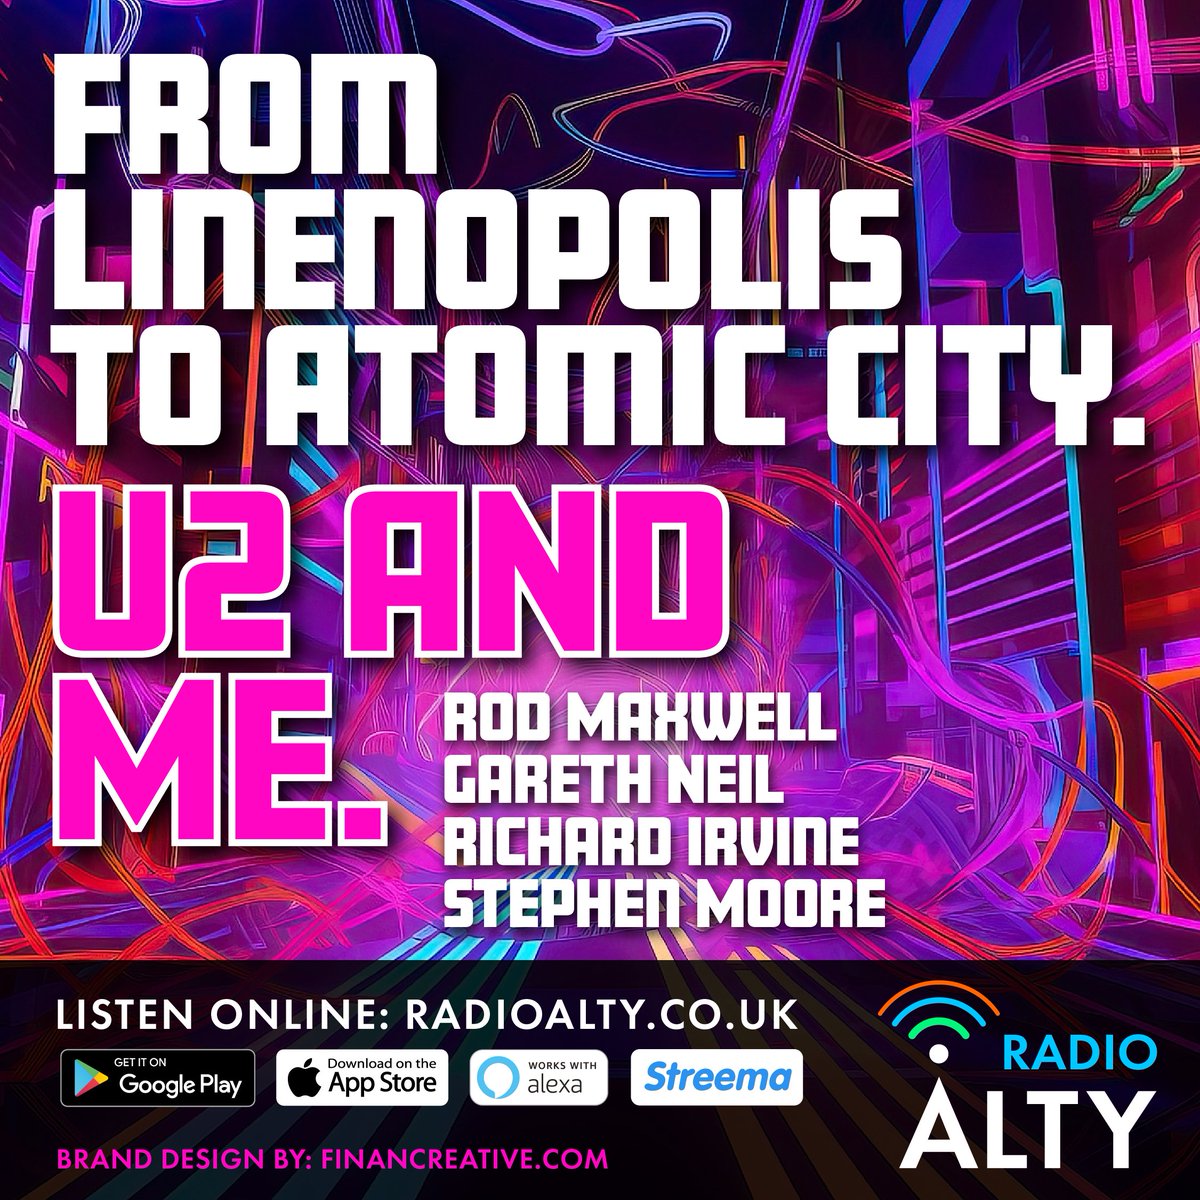 #U2 & Me - Friday on #theLateLateLunchshow 2pm. Hear Rod, Gareth, Richard & Stephen recall one of the biggest Belfast gigs of the 1980s. Live on RadioAlty.co.uk - online - apps - #Alexa. Supported by The Owners' Club - theownersclub.uk #U2 #JoshuaTree #Belfast